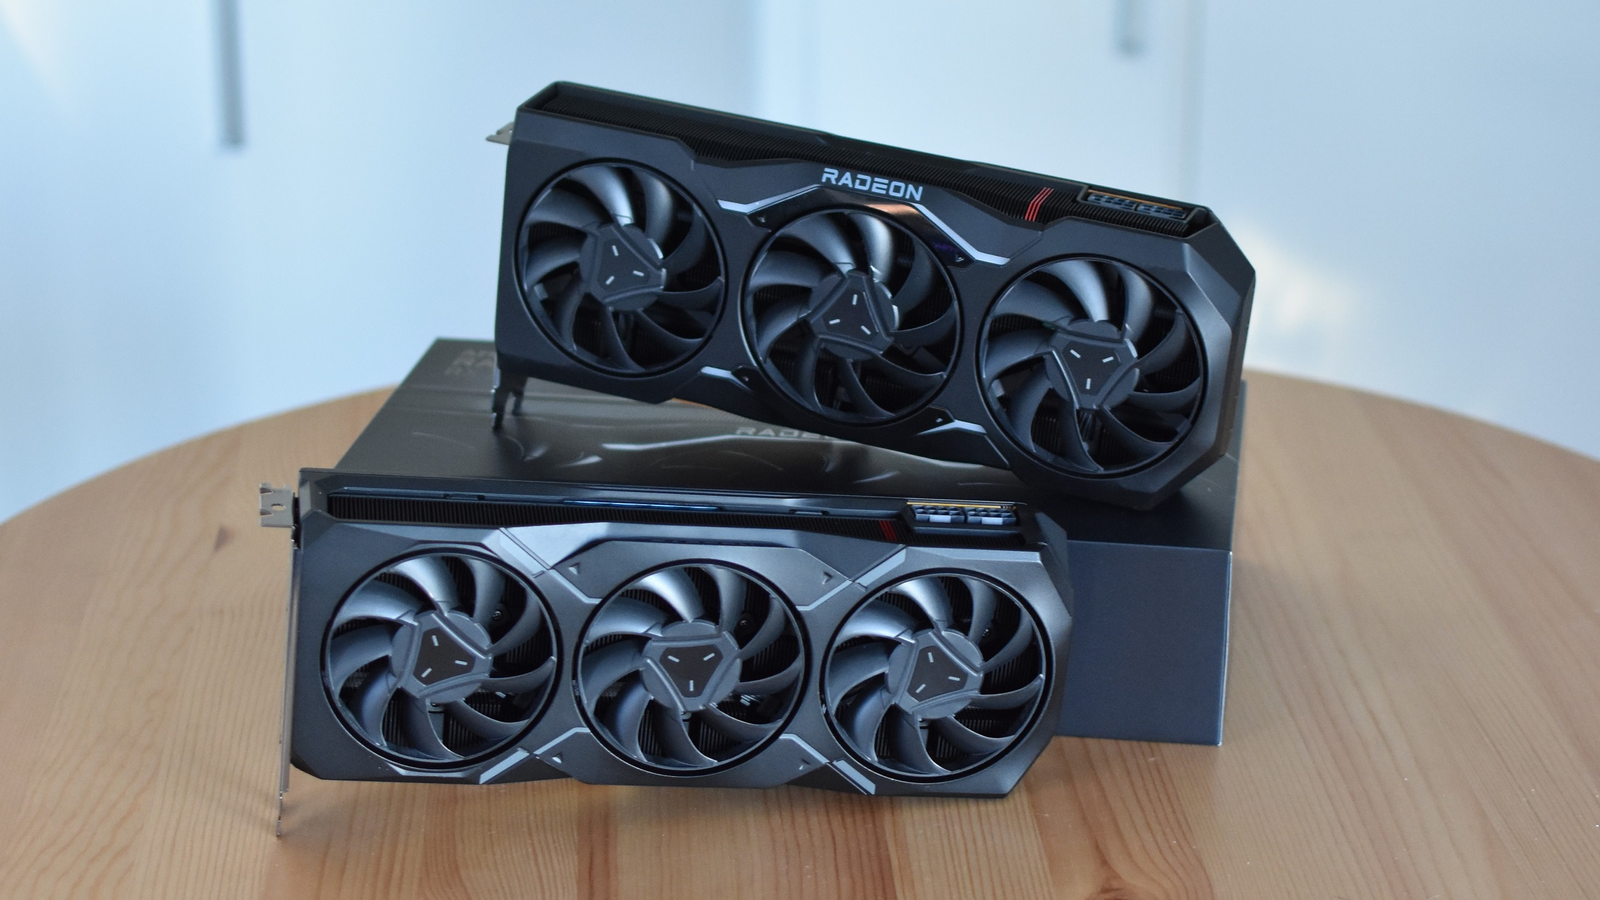 AMD Radeon RX 7900 XT and Radeon RX 7900 XTX review: rise of the reds